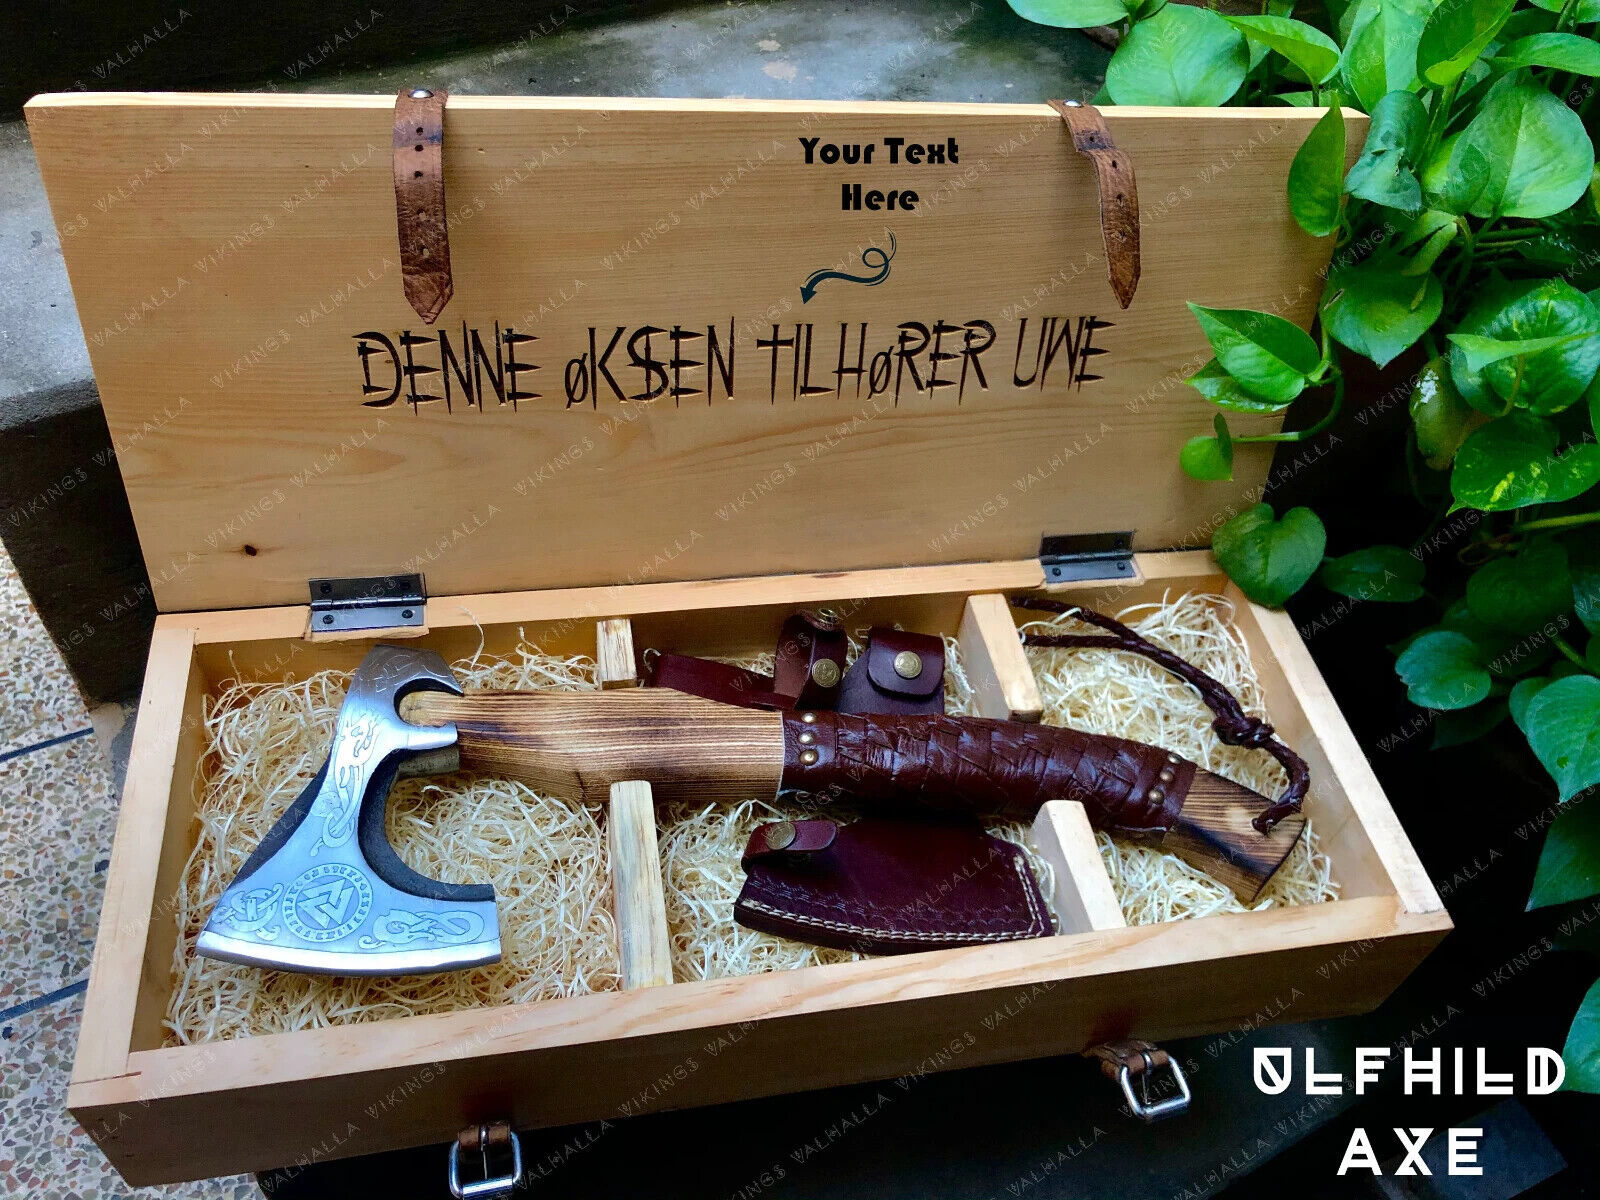 Vikings Axe with Personalized and Engraved Wooden Box Gift for Women/Men Wedding